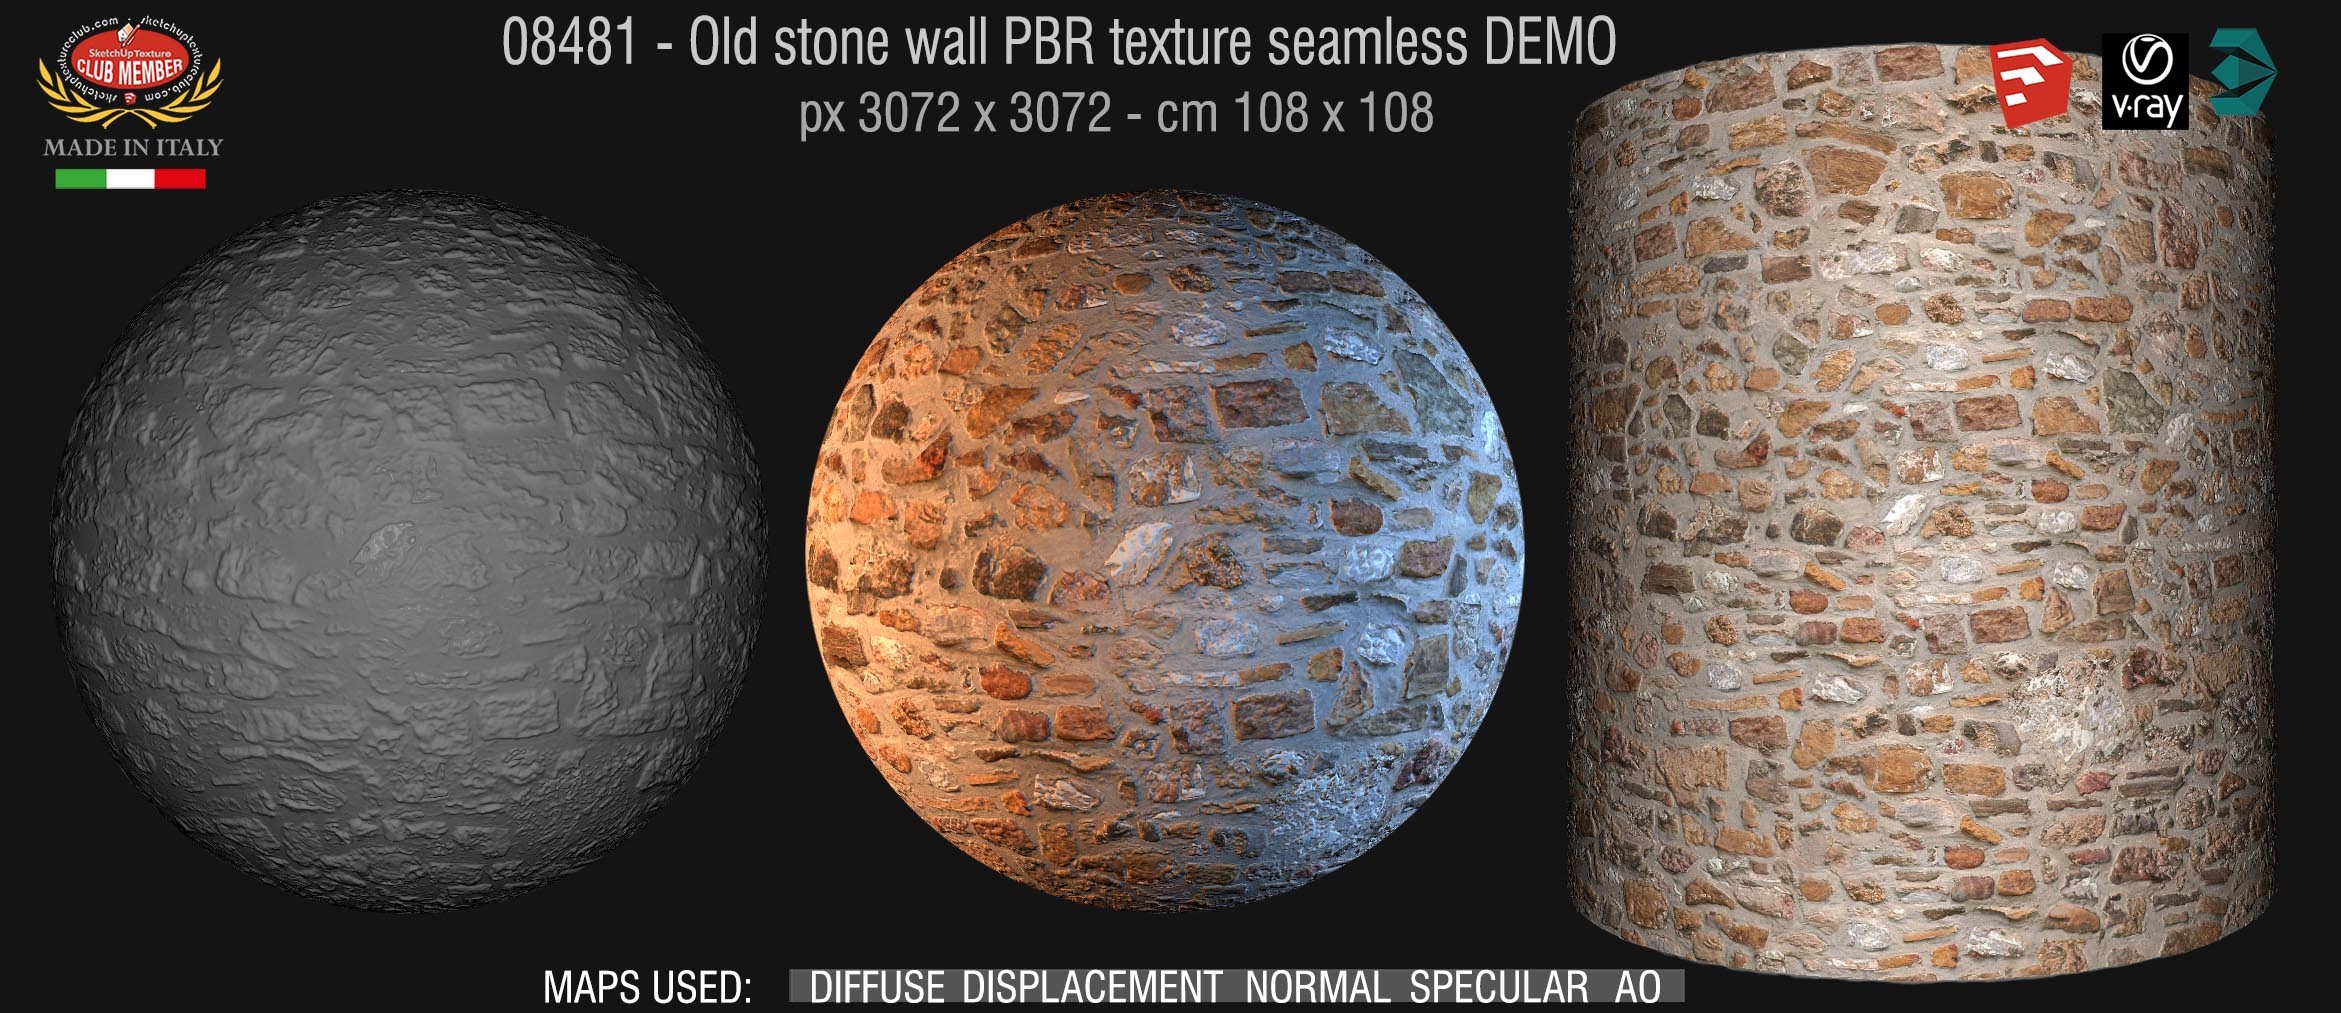 08481 Old stone wall PBR texture seamless DEMO